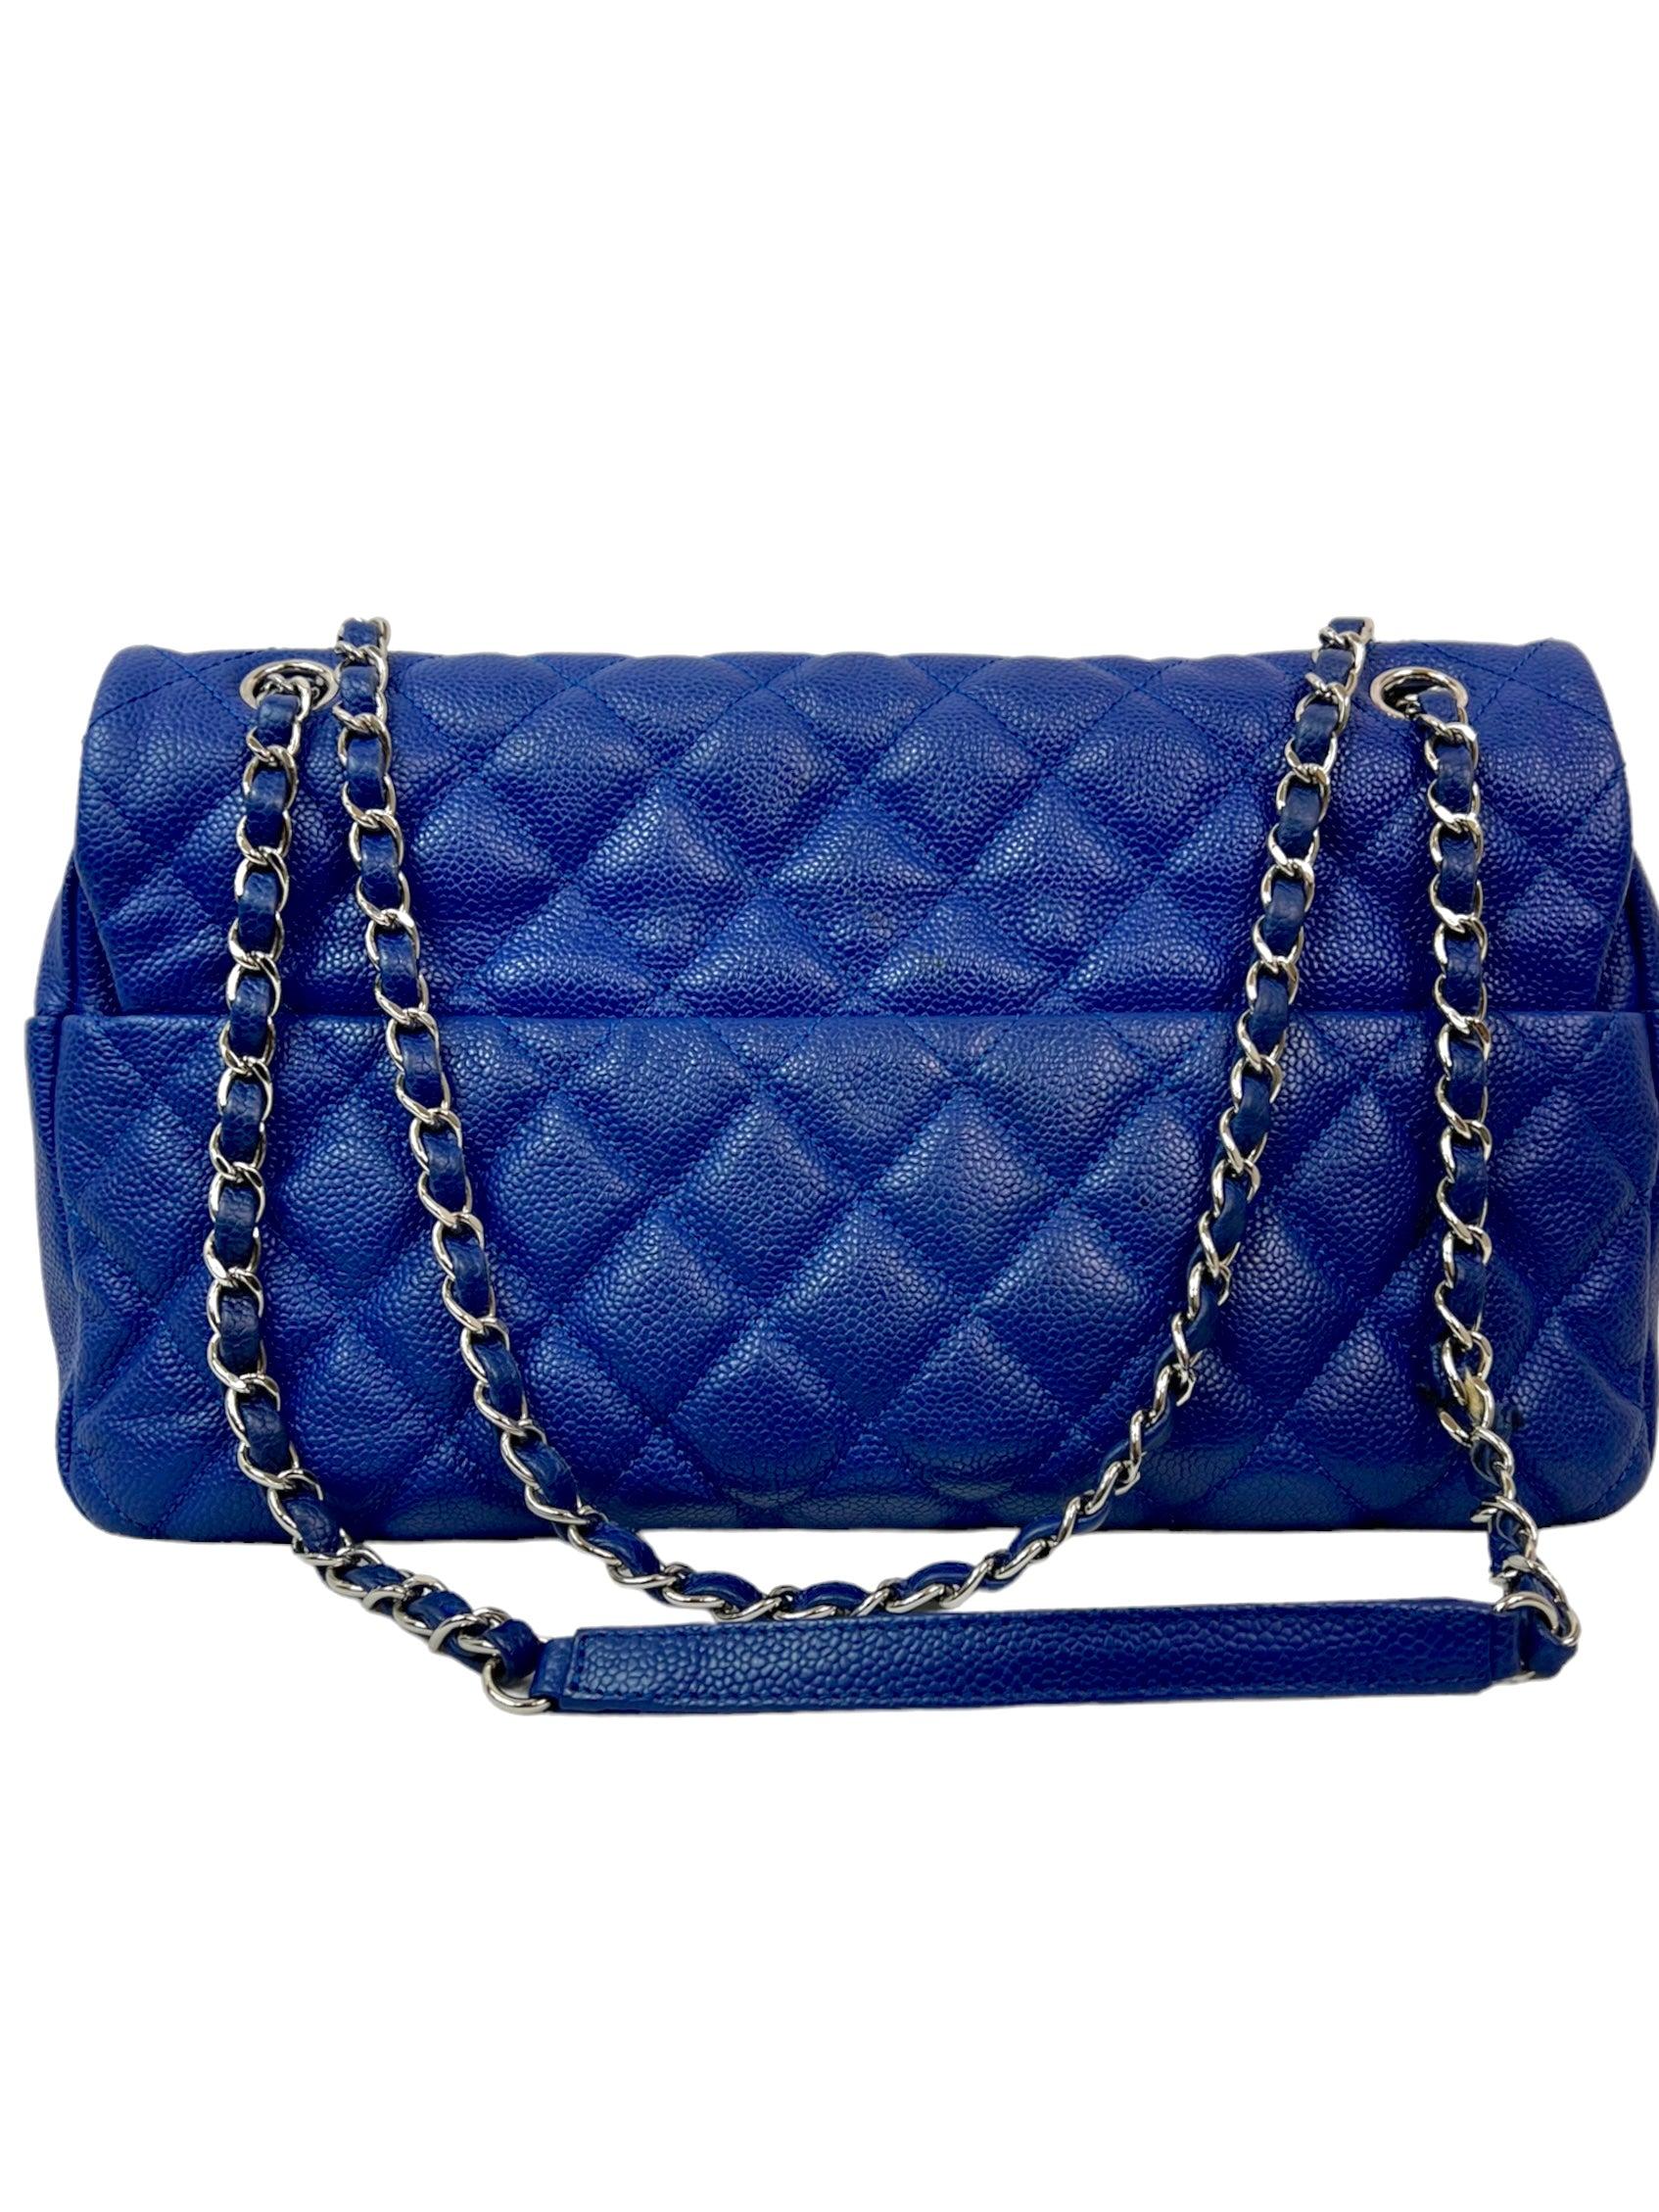 Navy Chanel Quilted Jumbo Bag  11